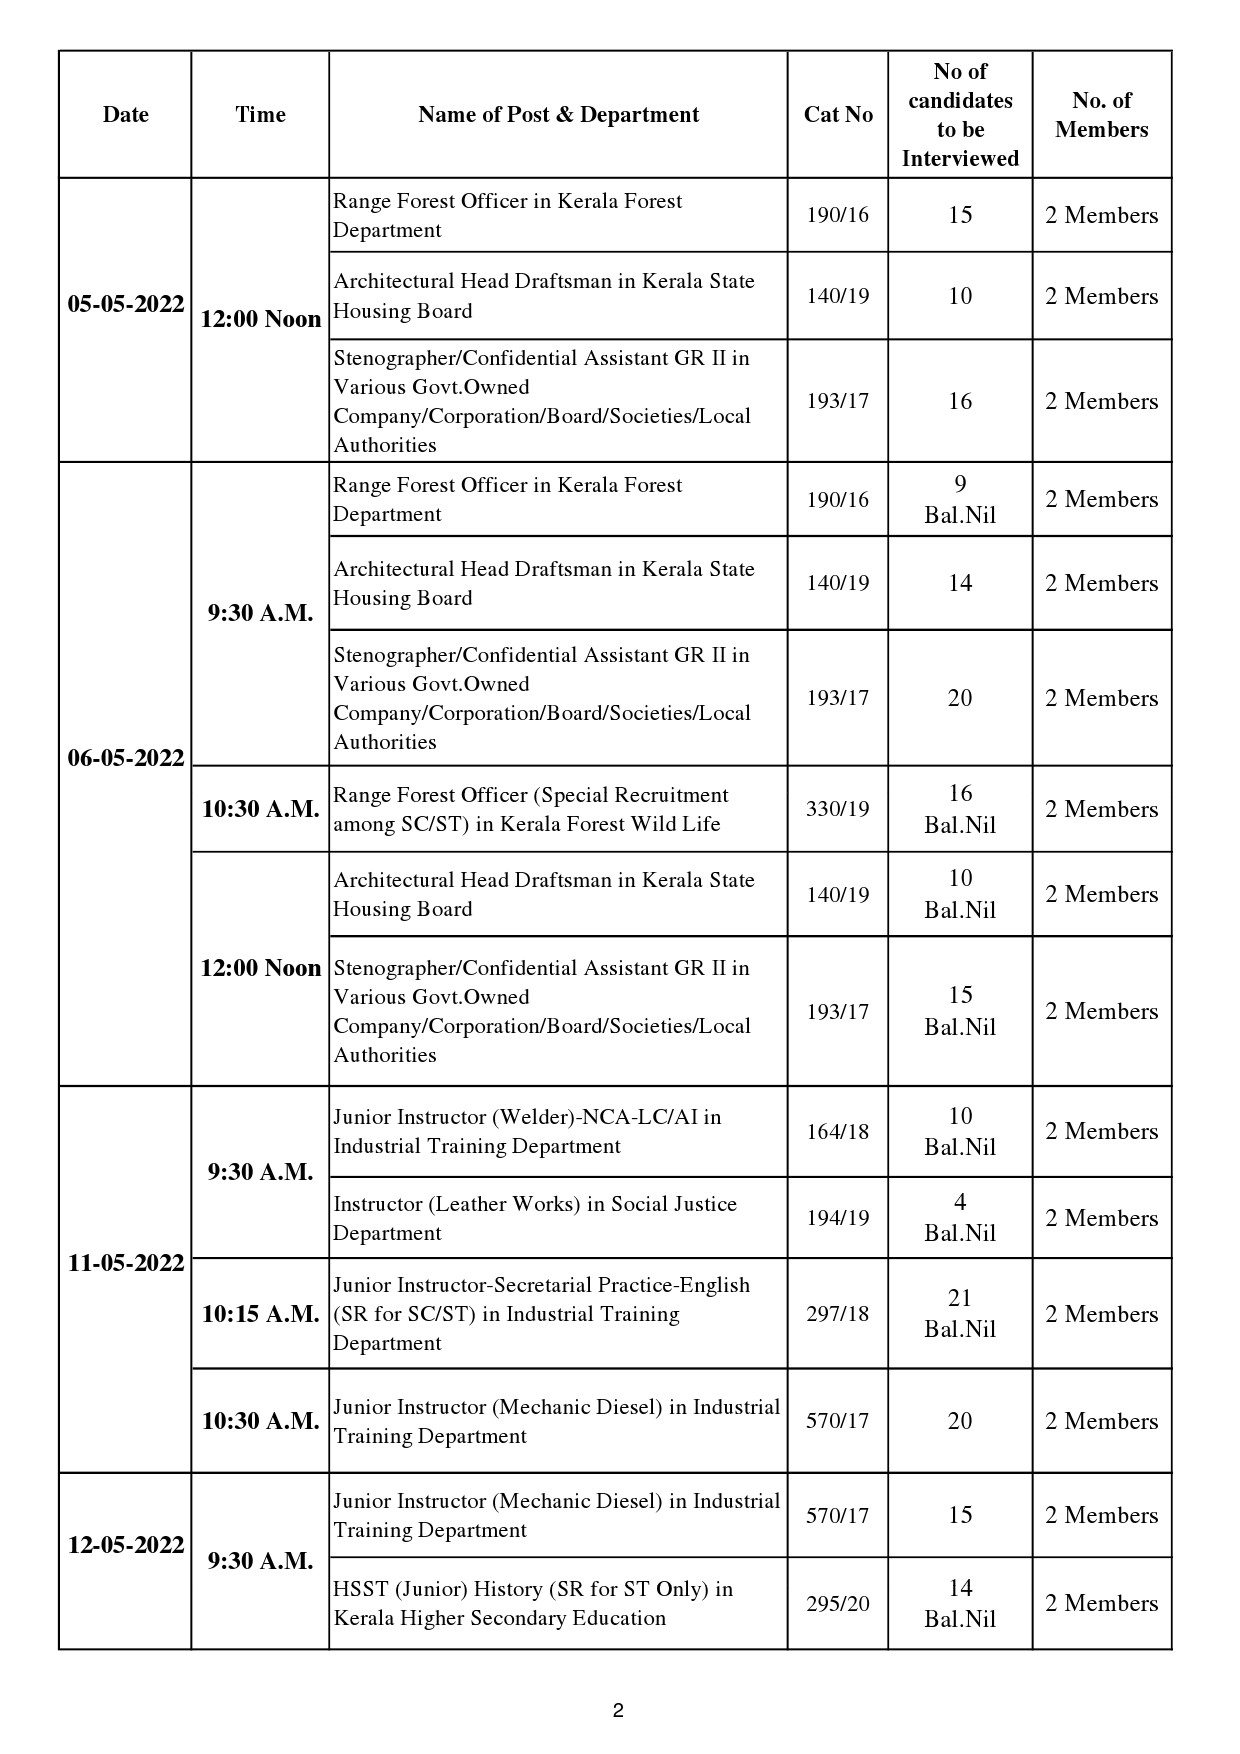 KPSC INTERVIEW PROGRAMME FOR THE MONTH OF MAY 2022 - Notification Image 2